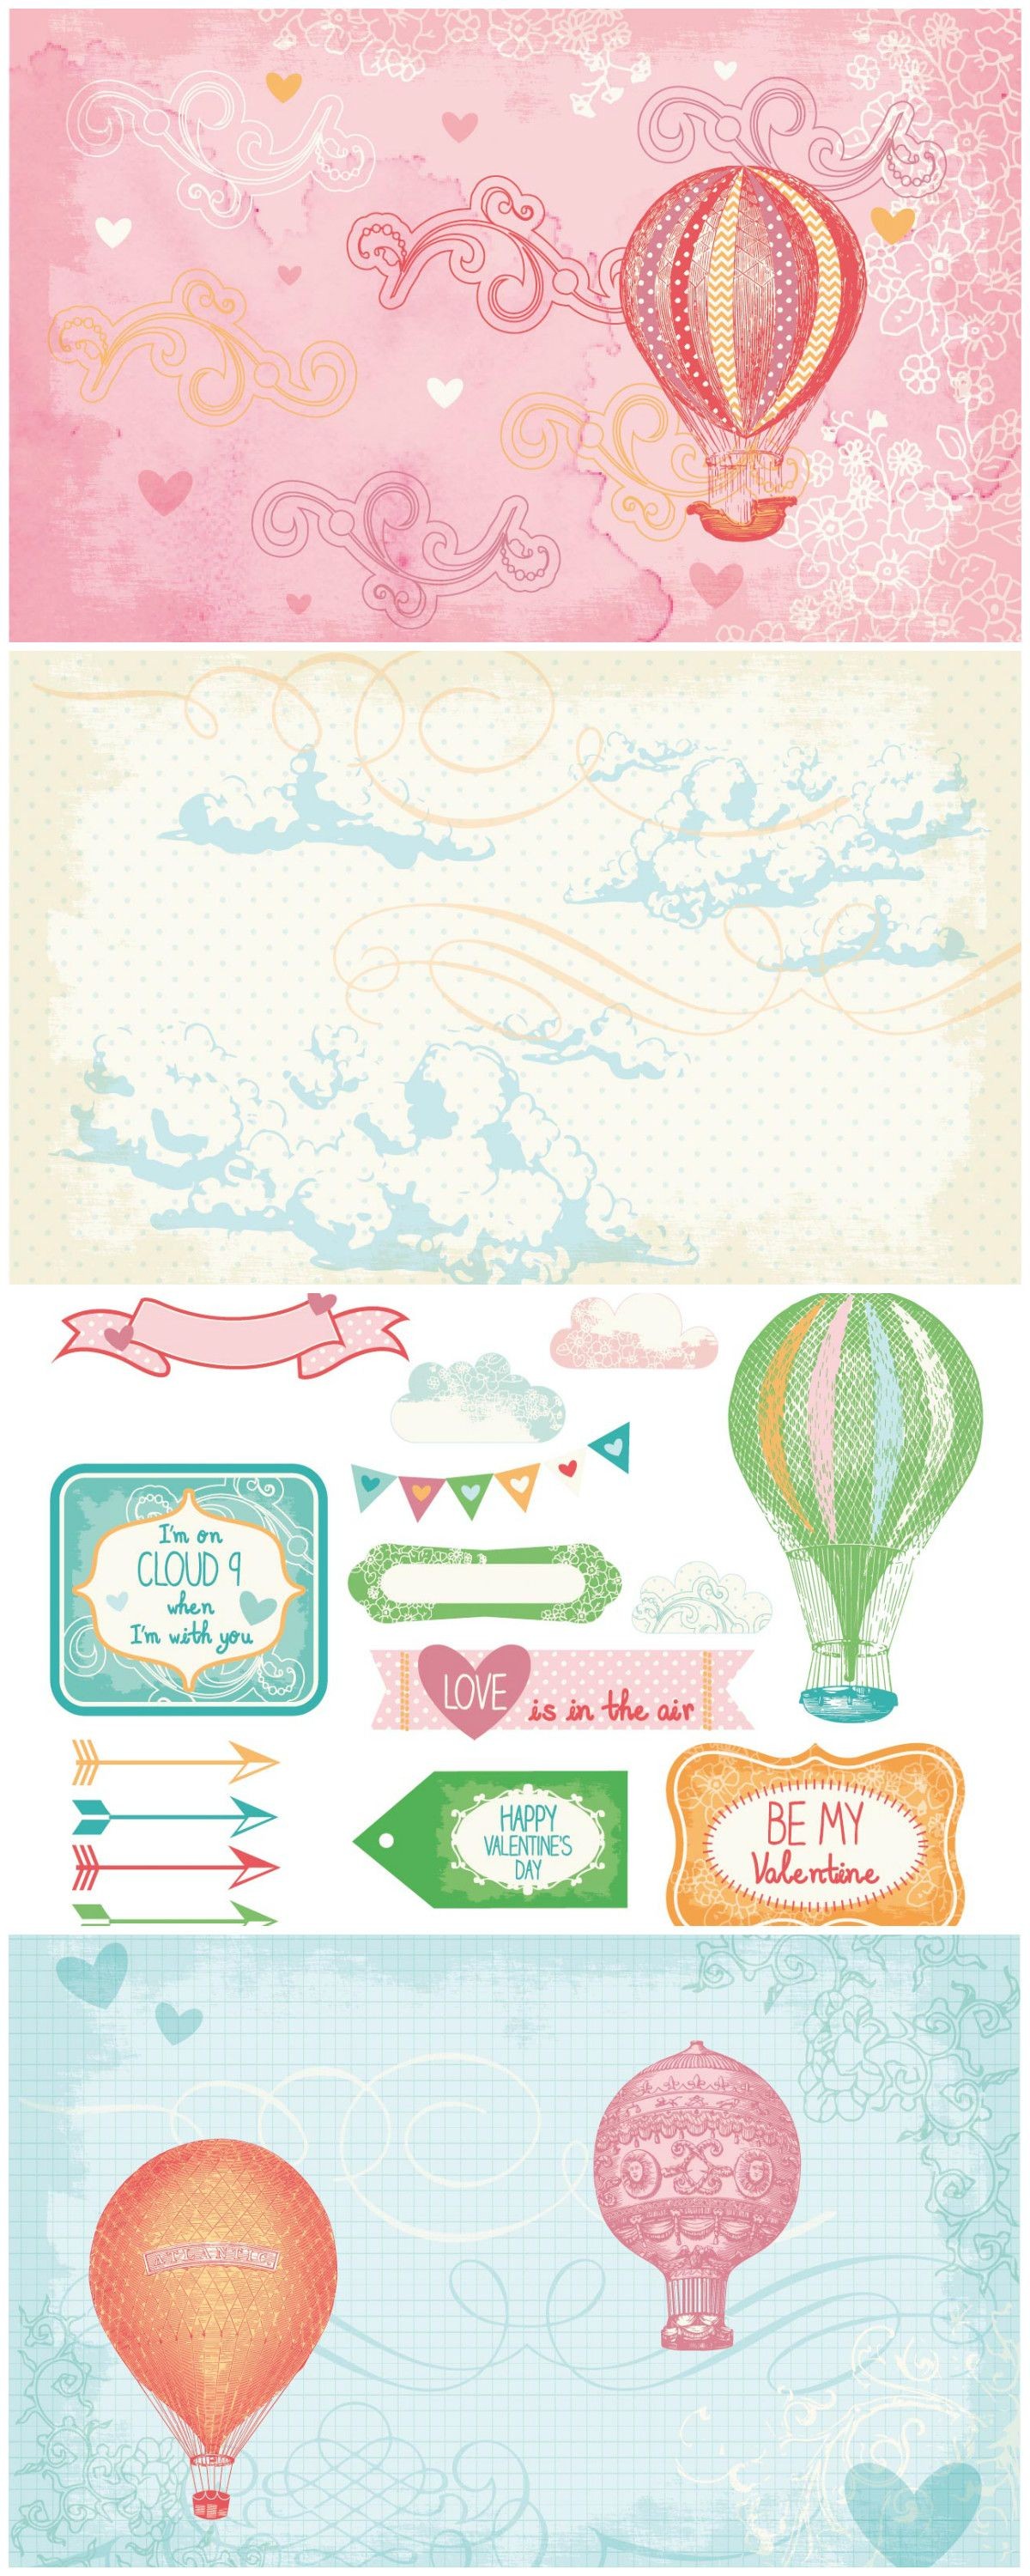 Papercraft Inspirations Hot Air Balloons Free Printable Papers and toppers